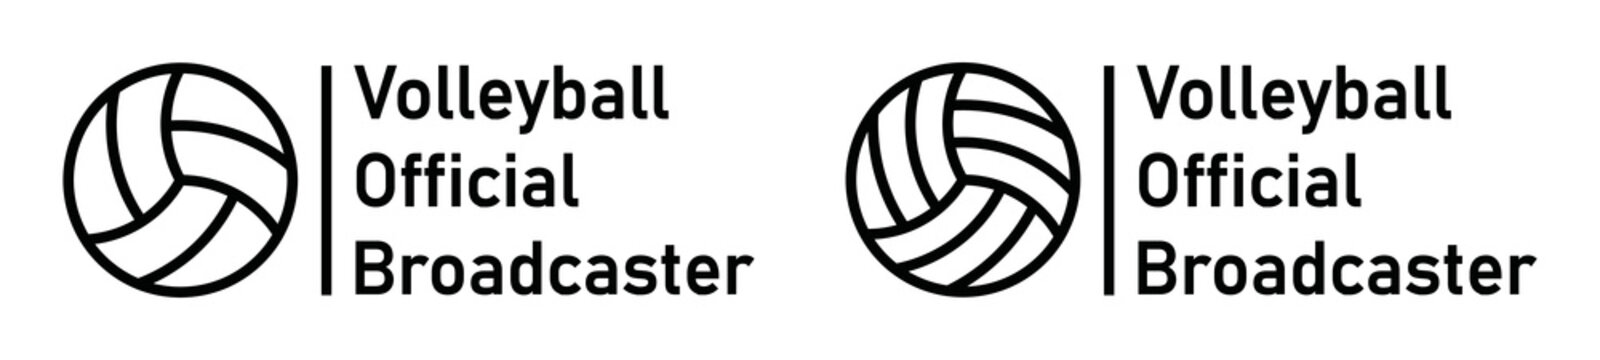 Volleyball official broadcaster icon. Volleyball icon, vector illustration